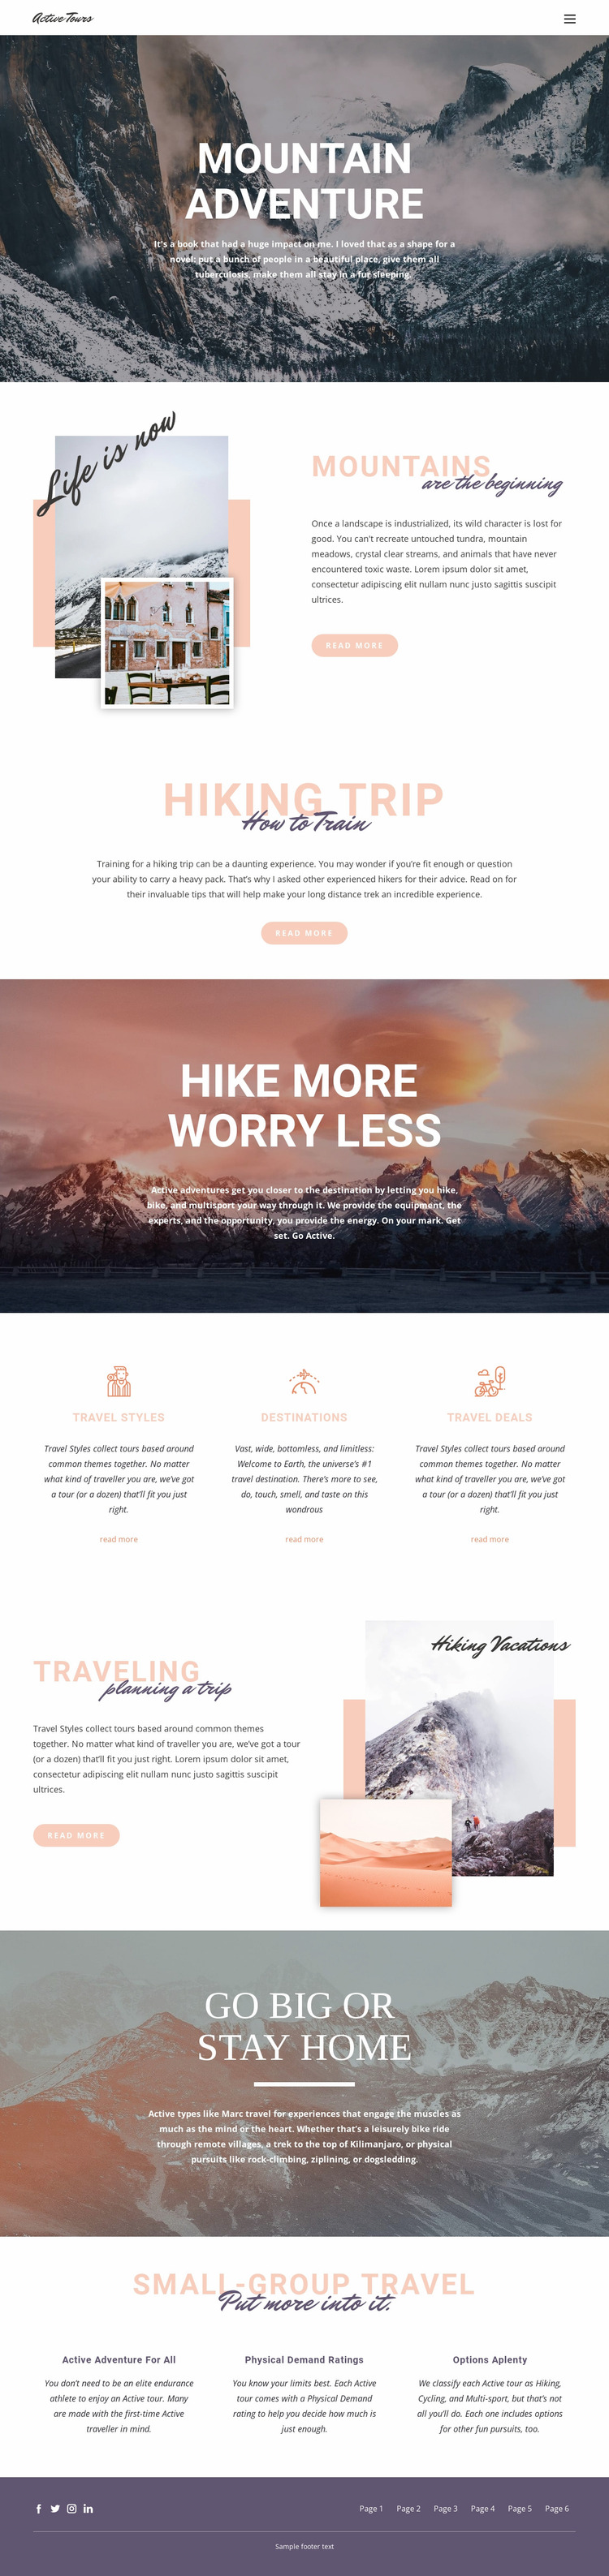 Guided backpacking trips Website Mockup